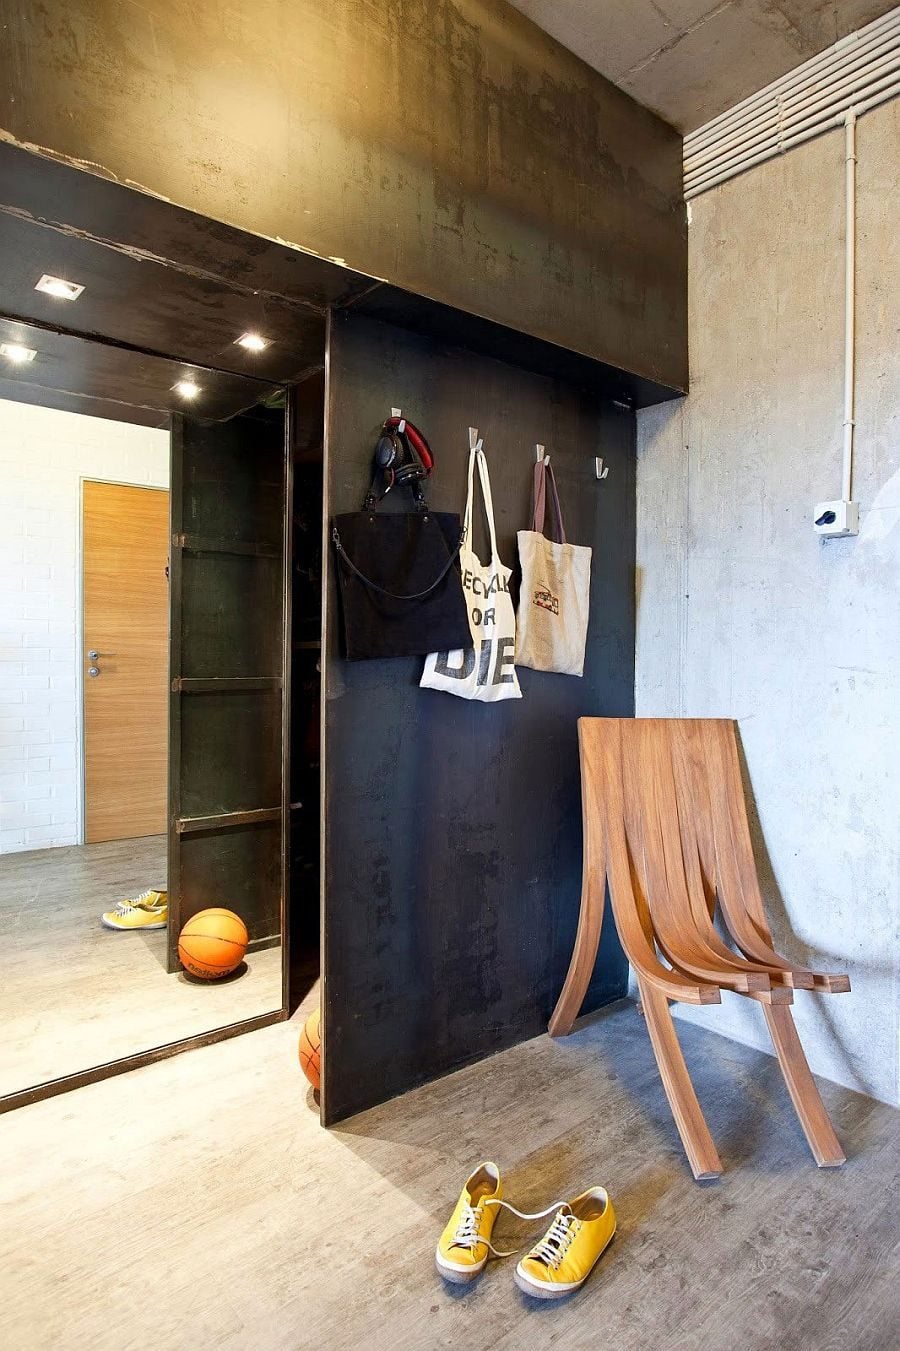 3Black-metal-wall-separates-the-living-space-from-the-entrance